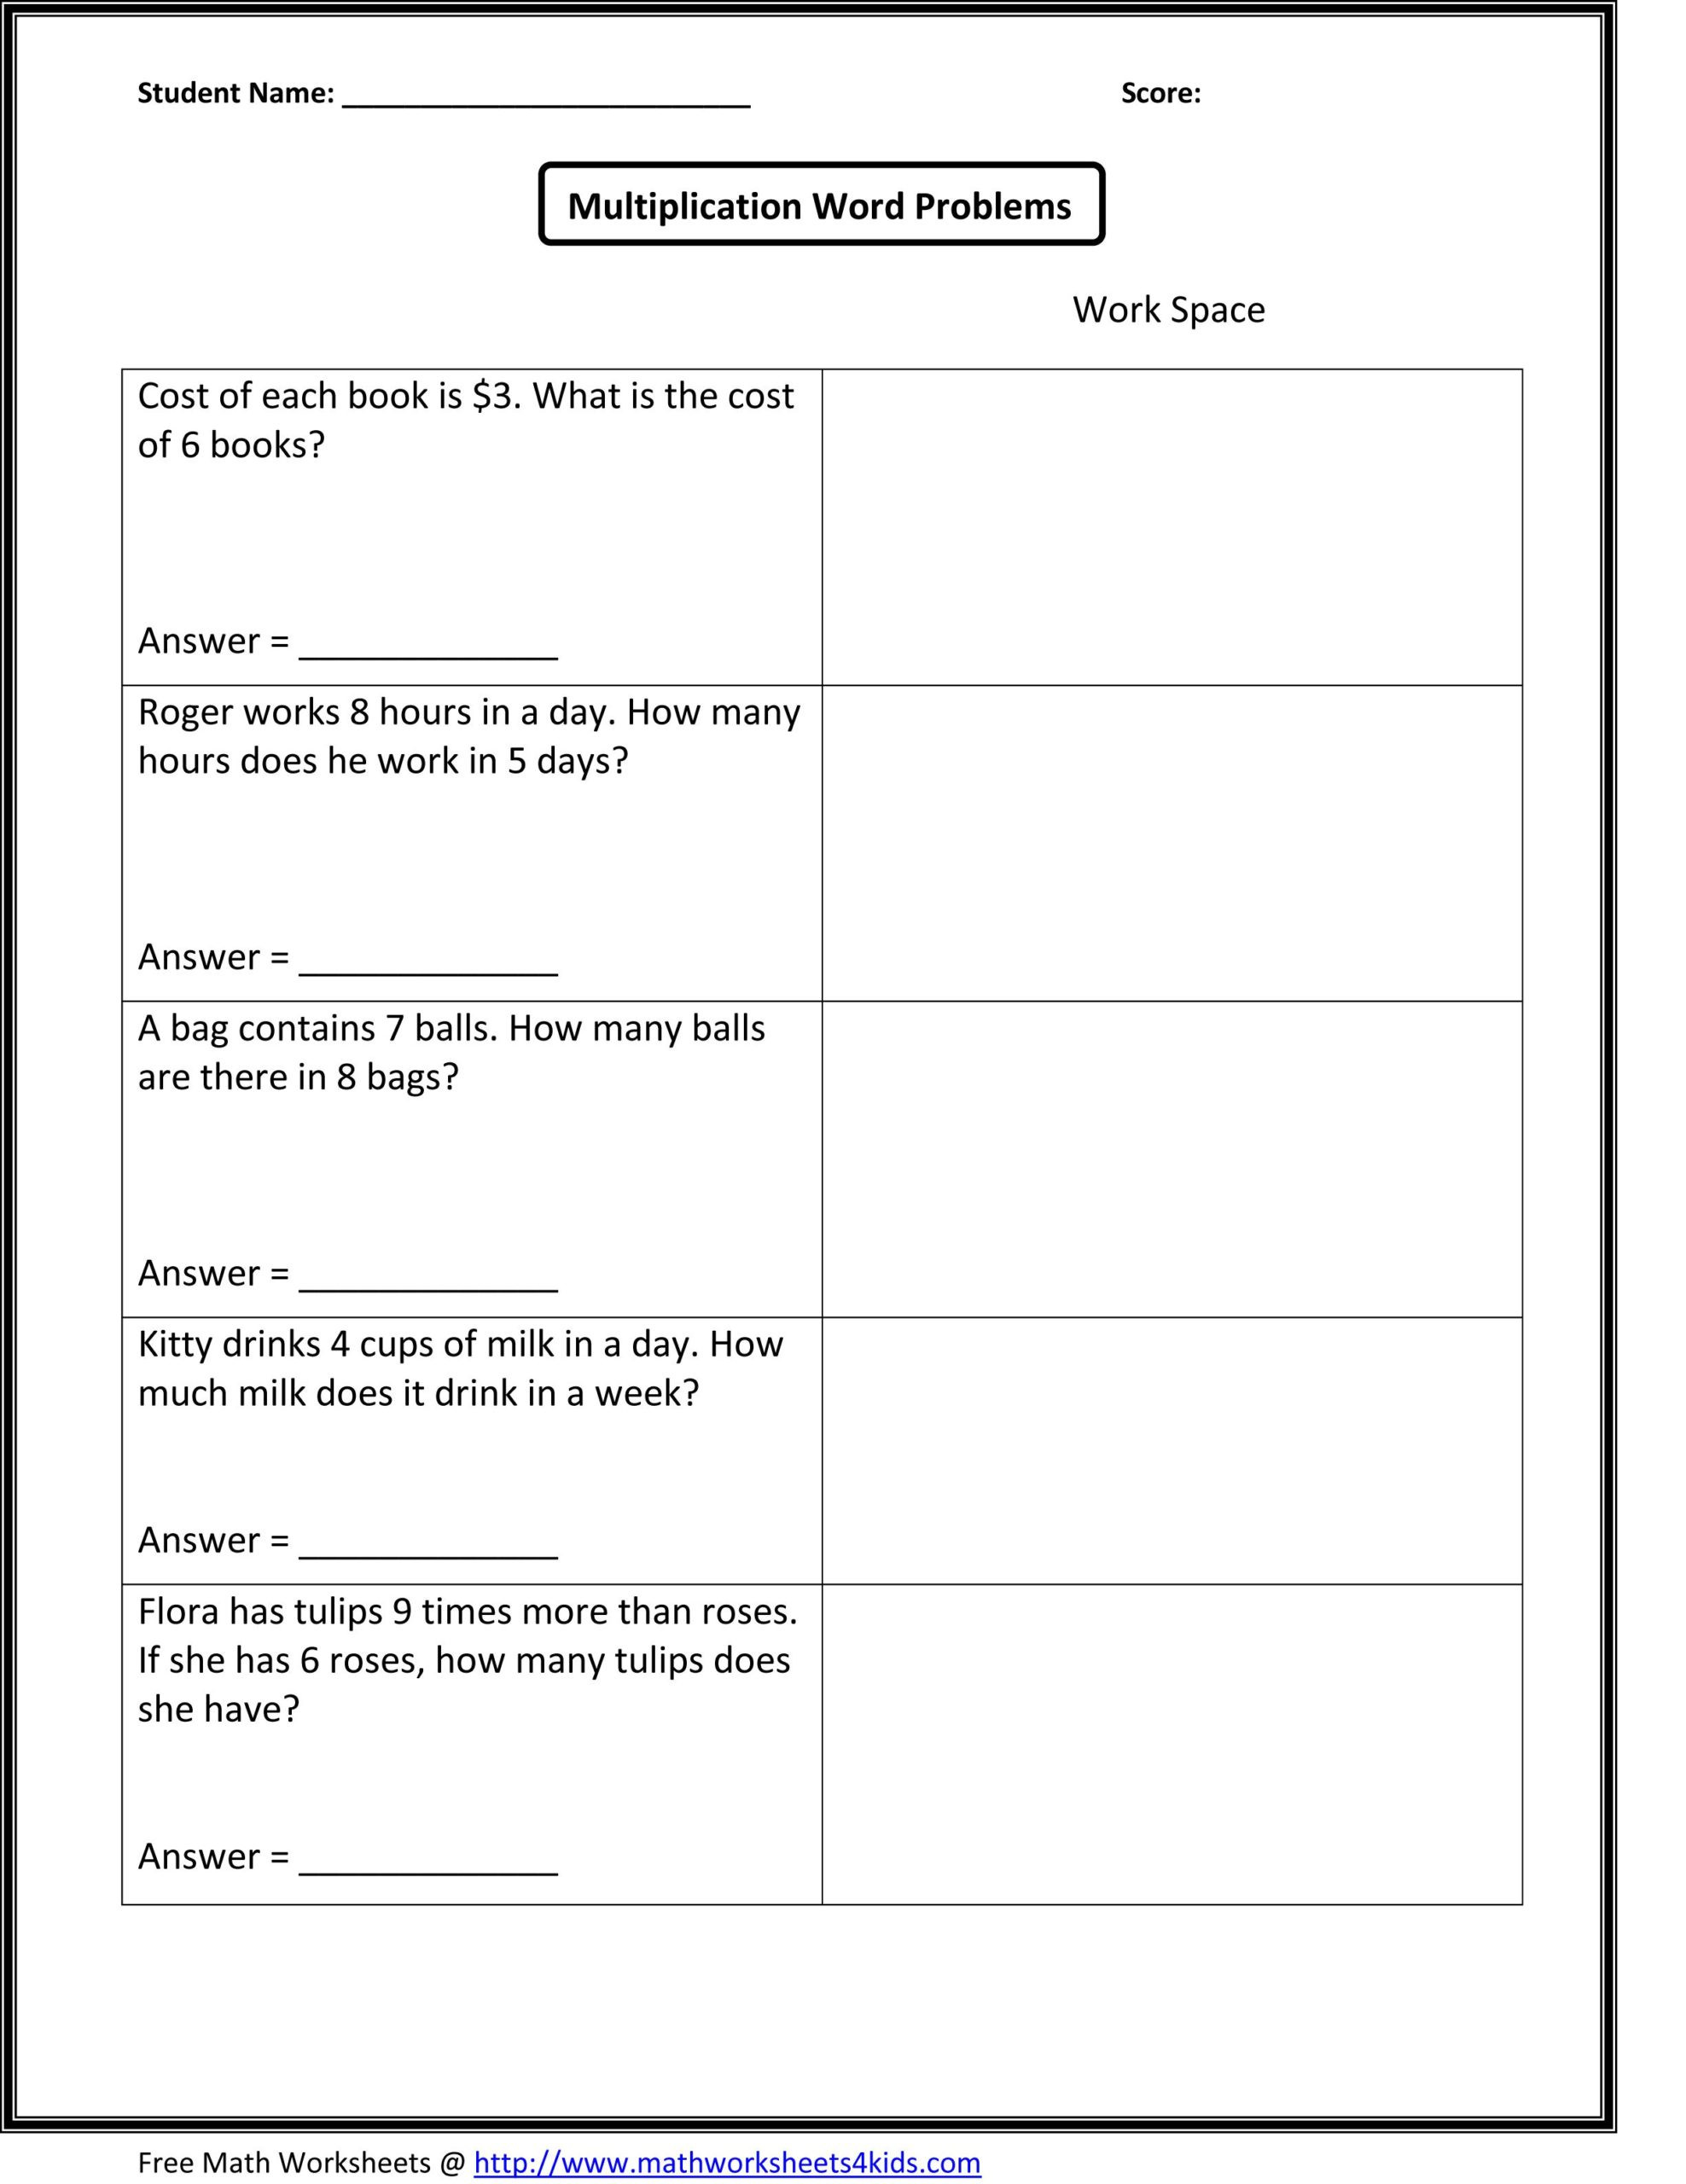 Solving Equations Word Problems Worksheet Math Worksheets by Grade and Subject Matter with 3rd